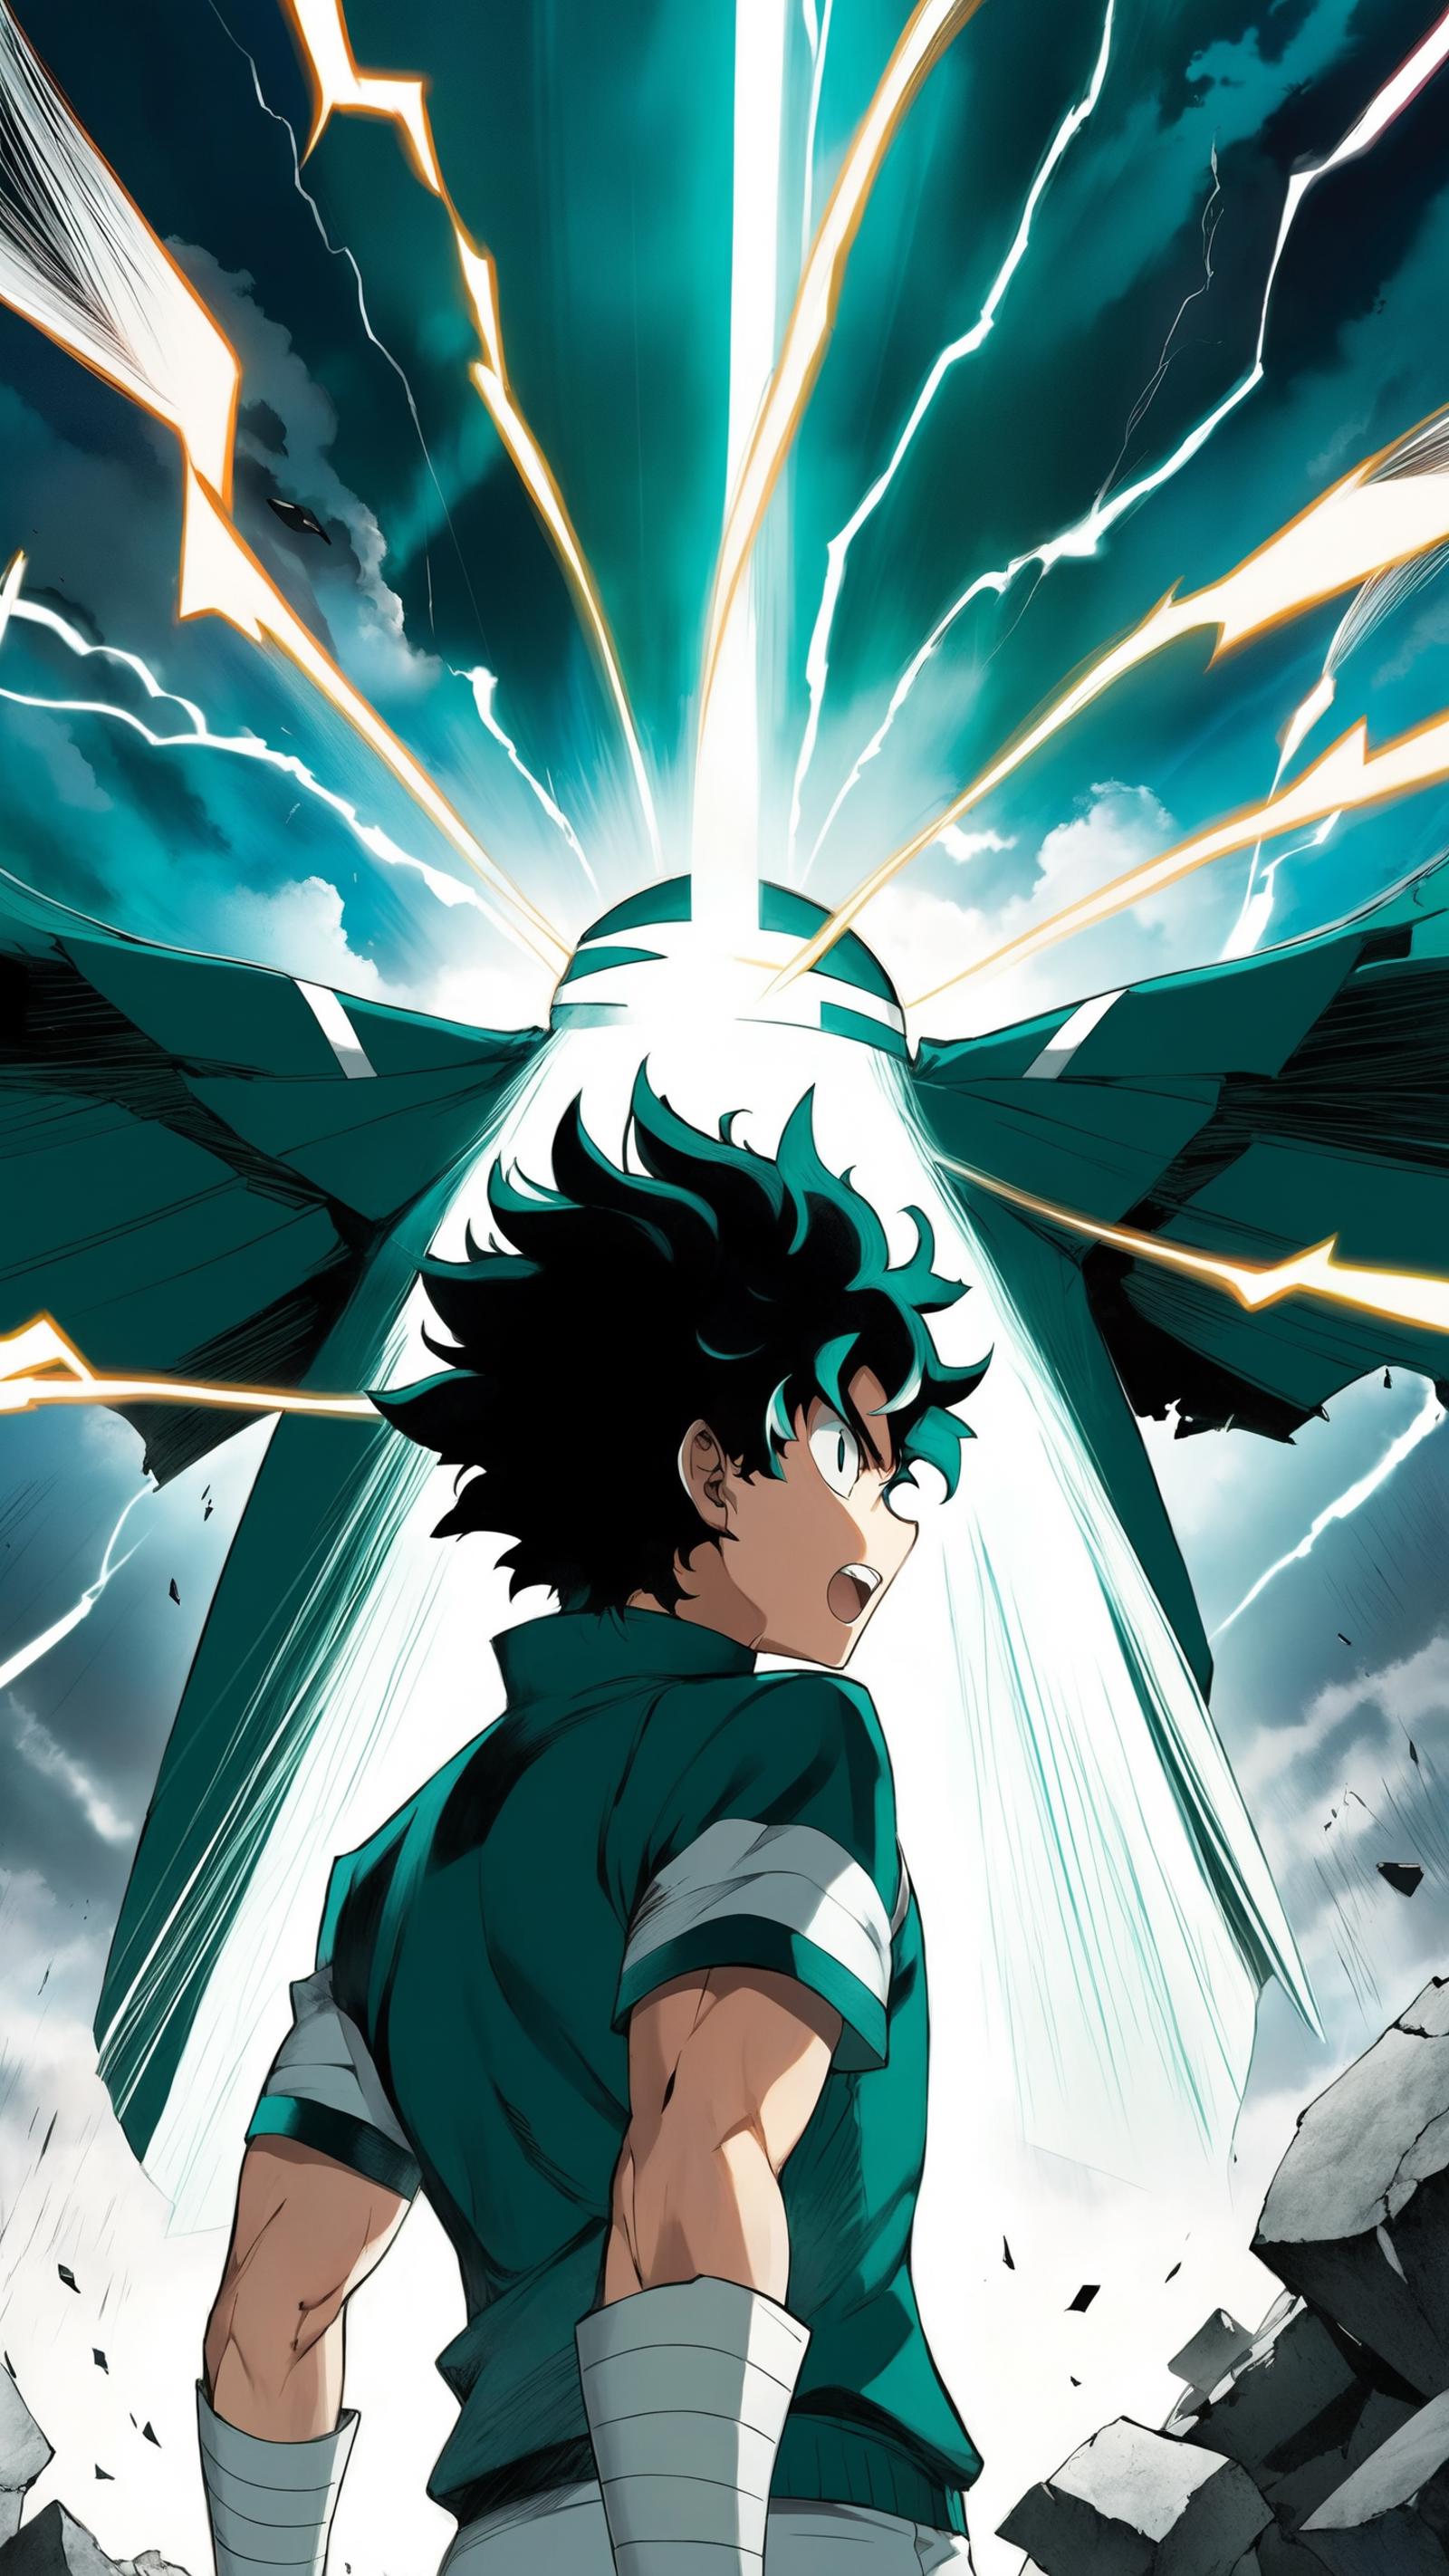 Anime Character in Green Shirt with Lightning Bolts Behind Him